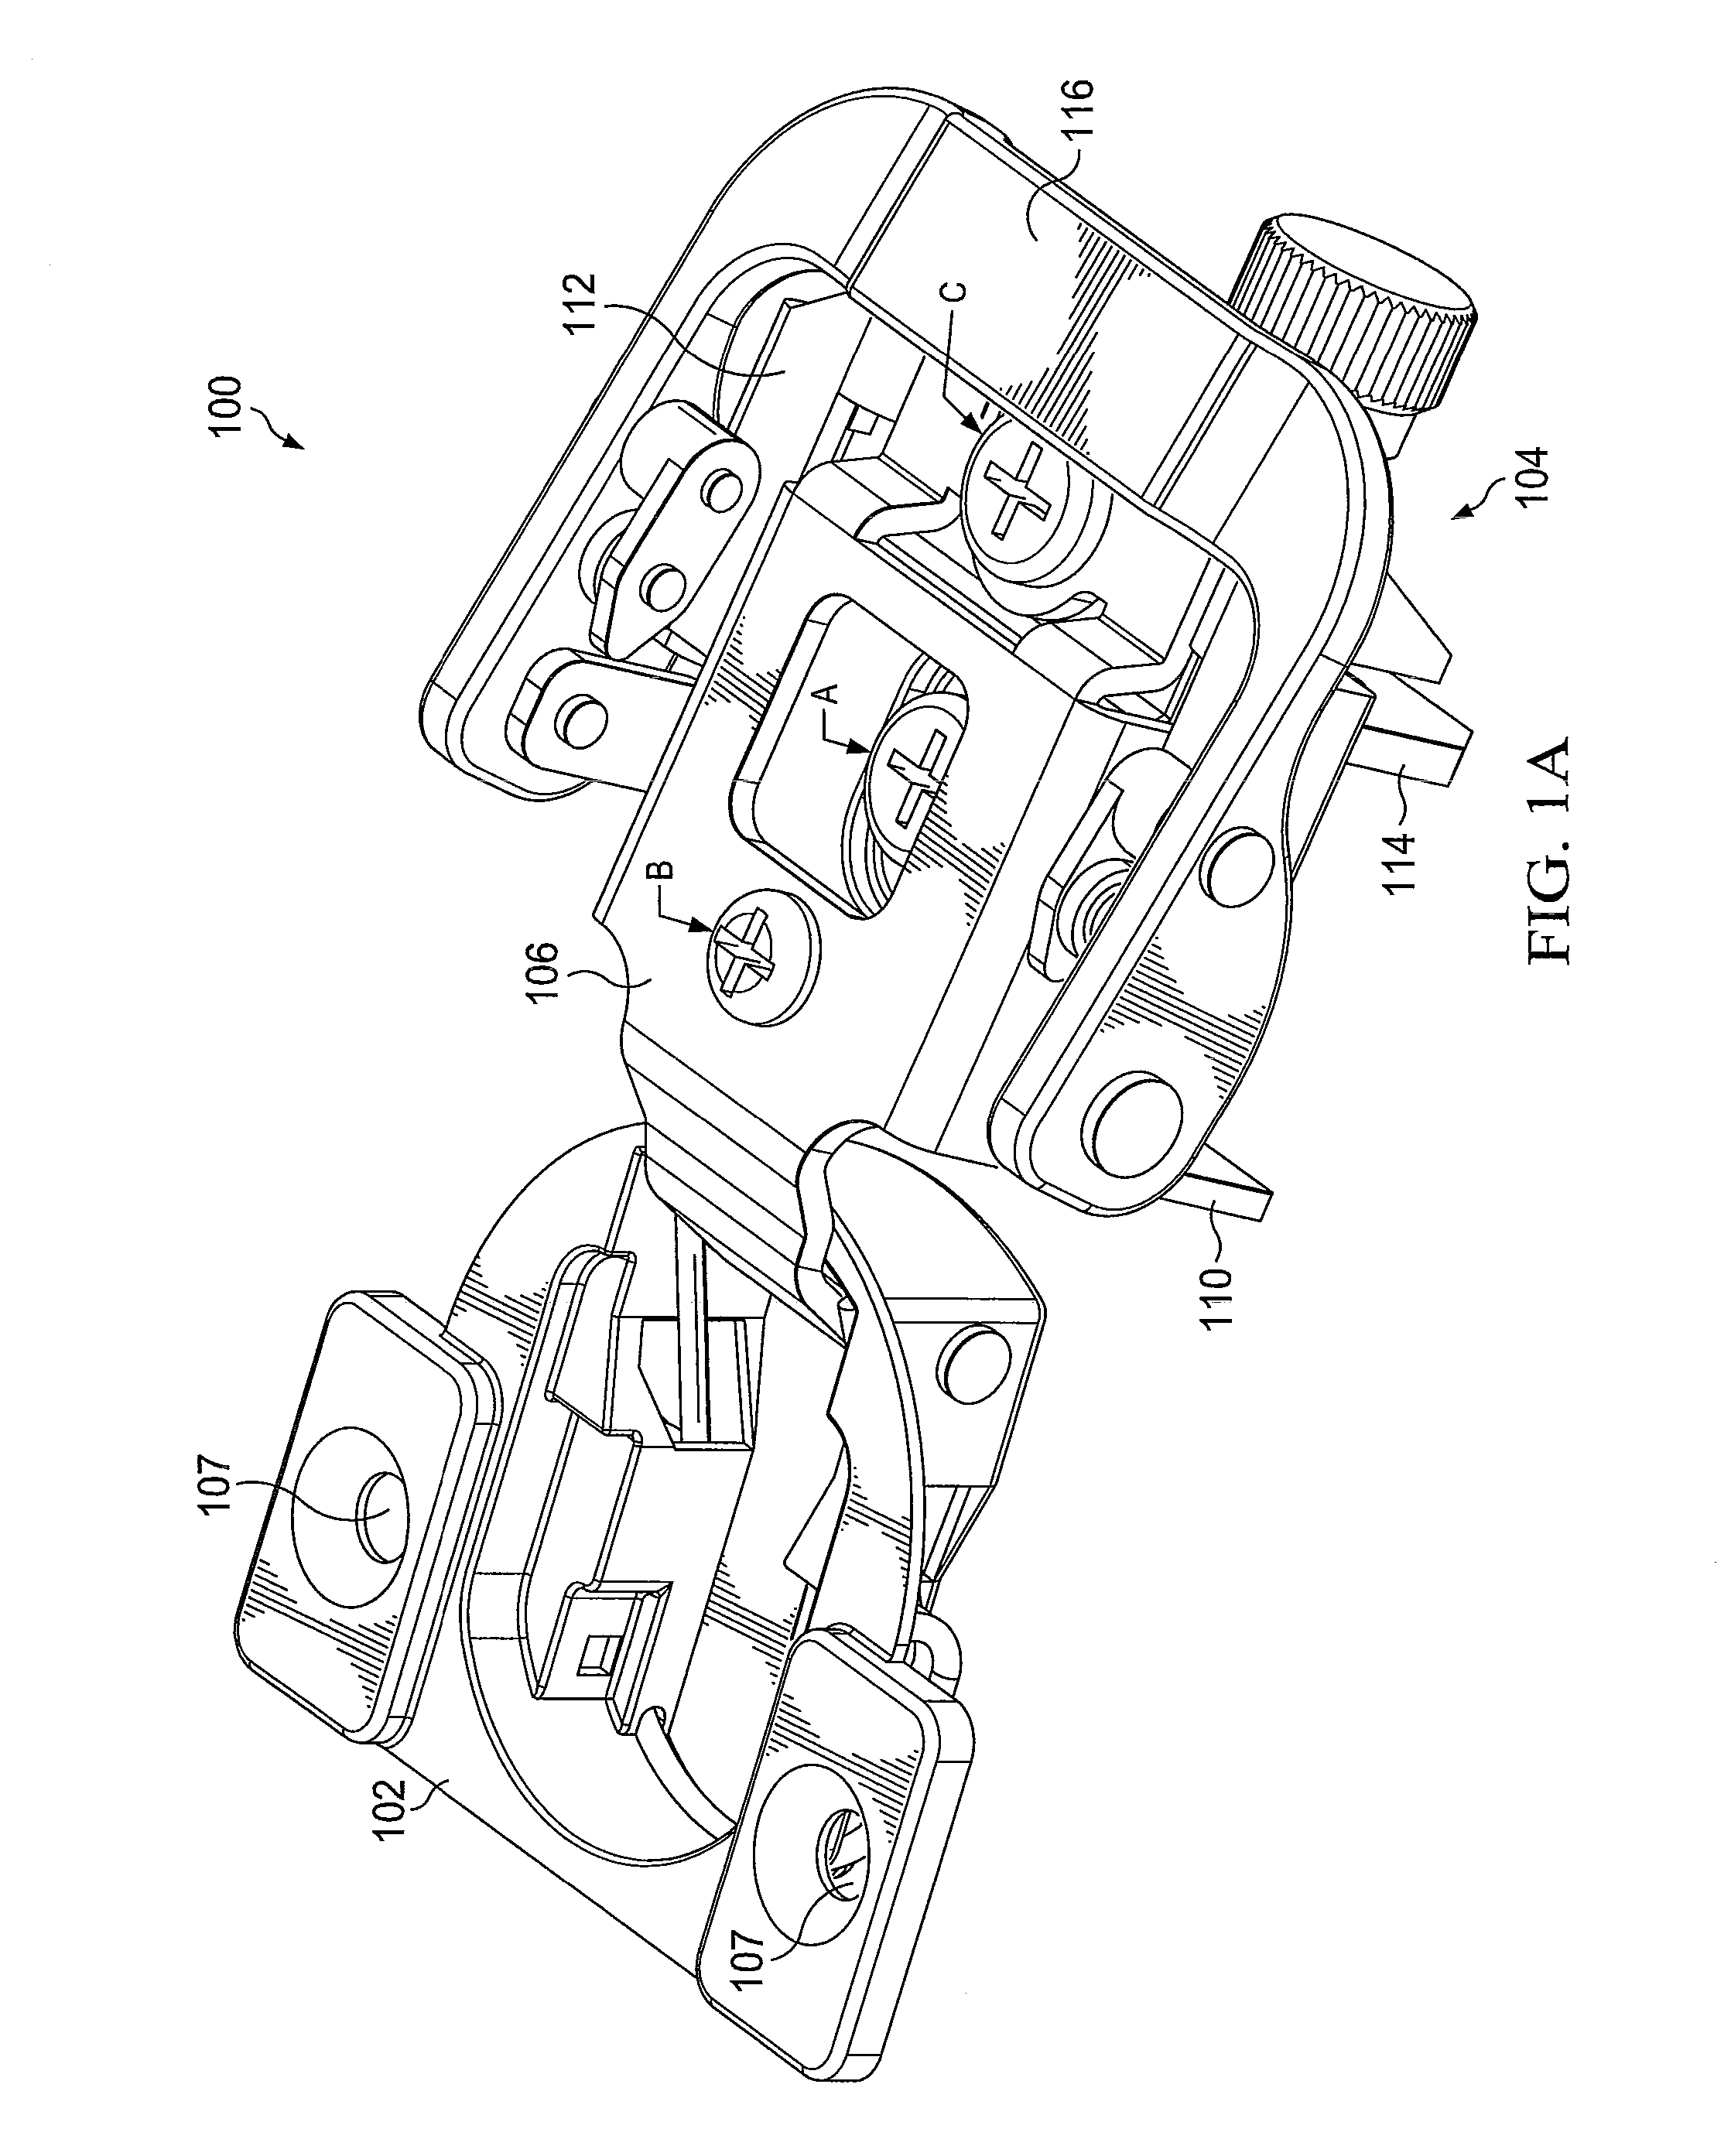 Removable compact hinge and method of use